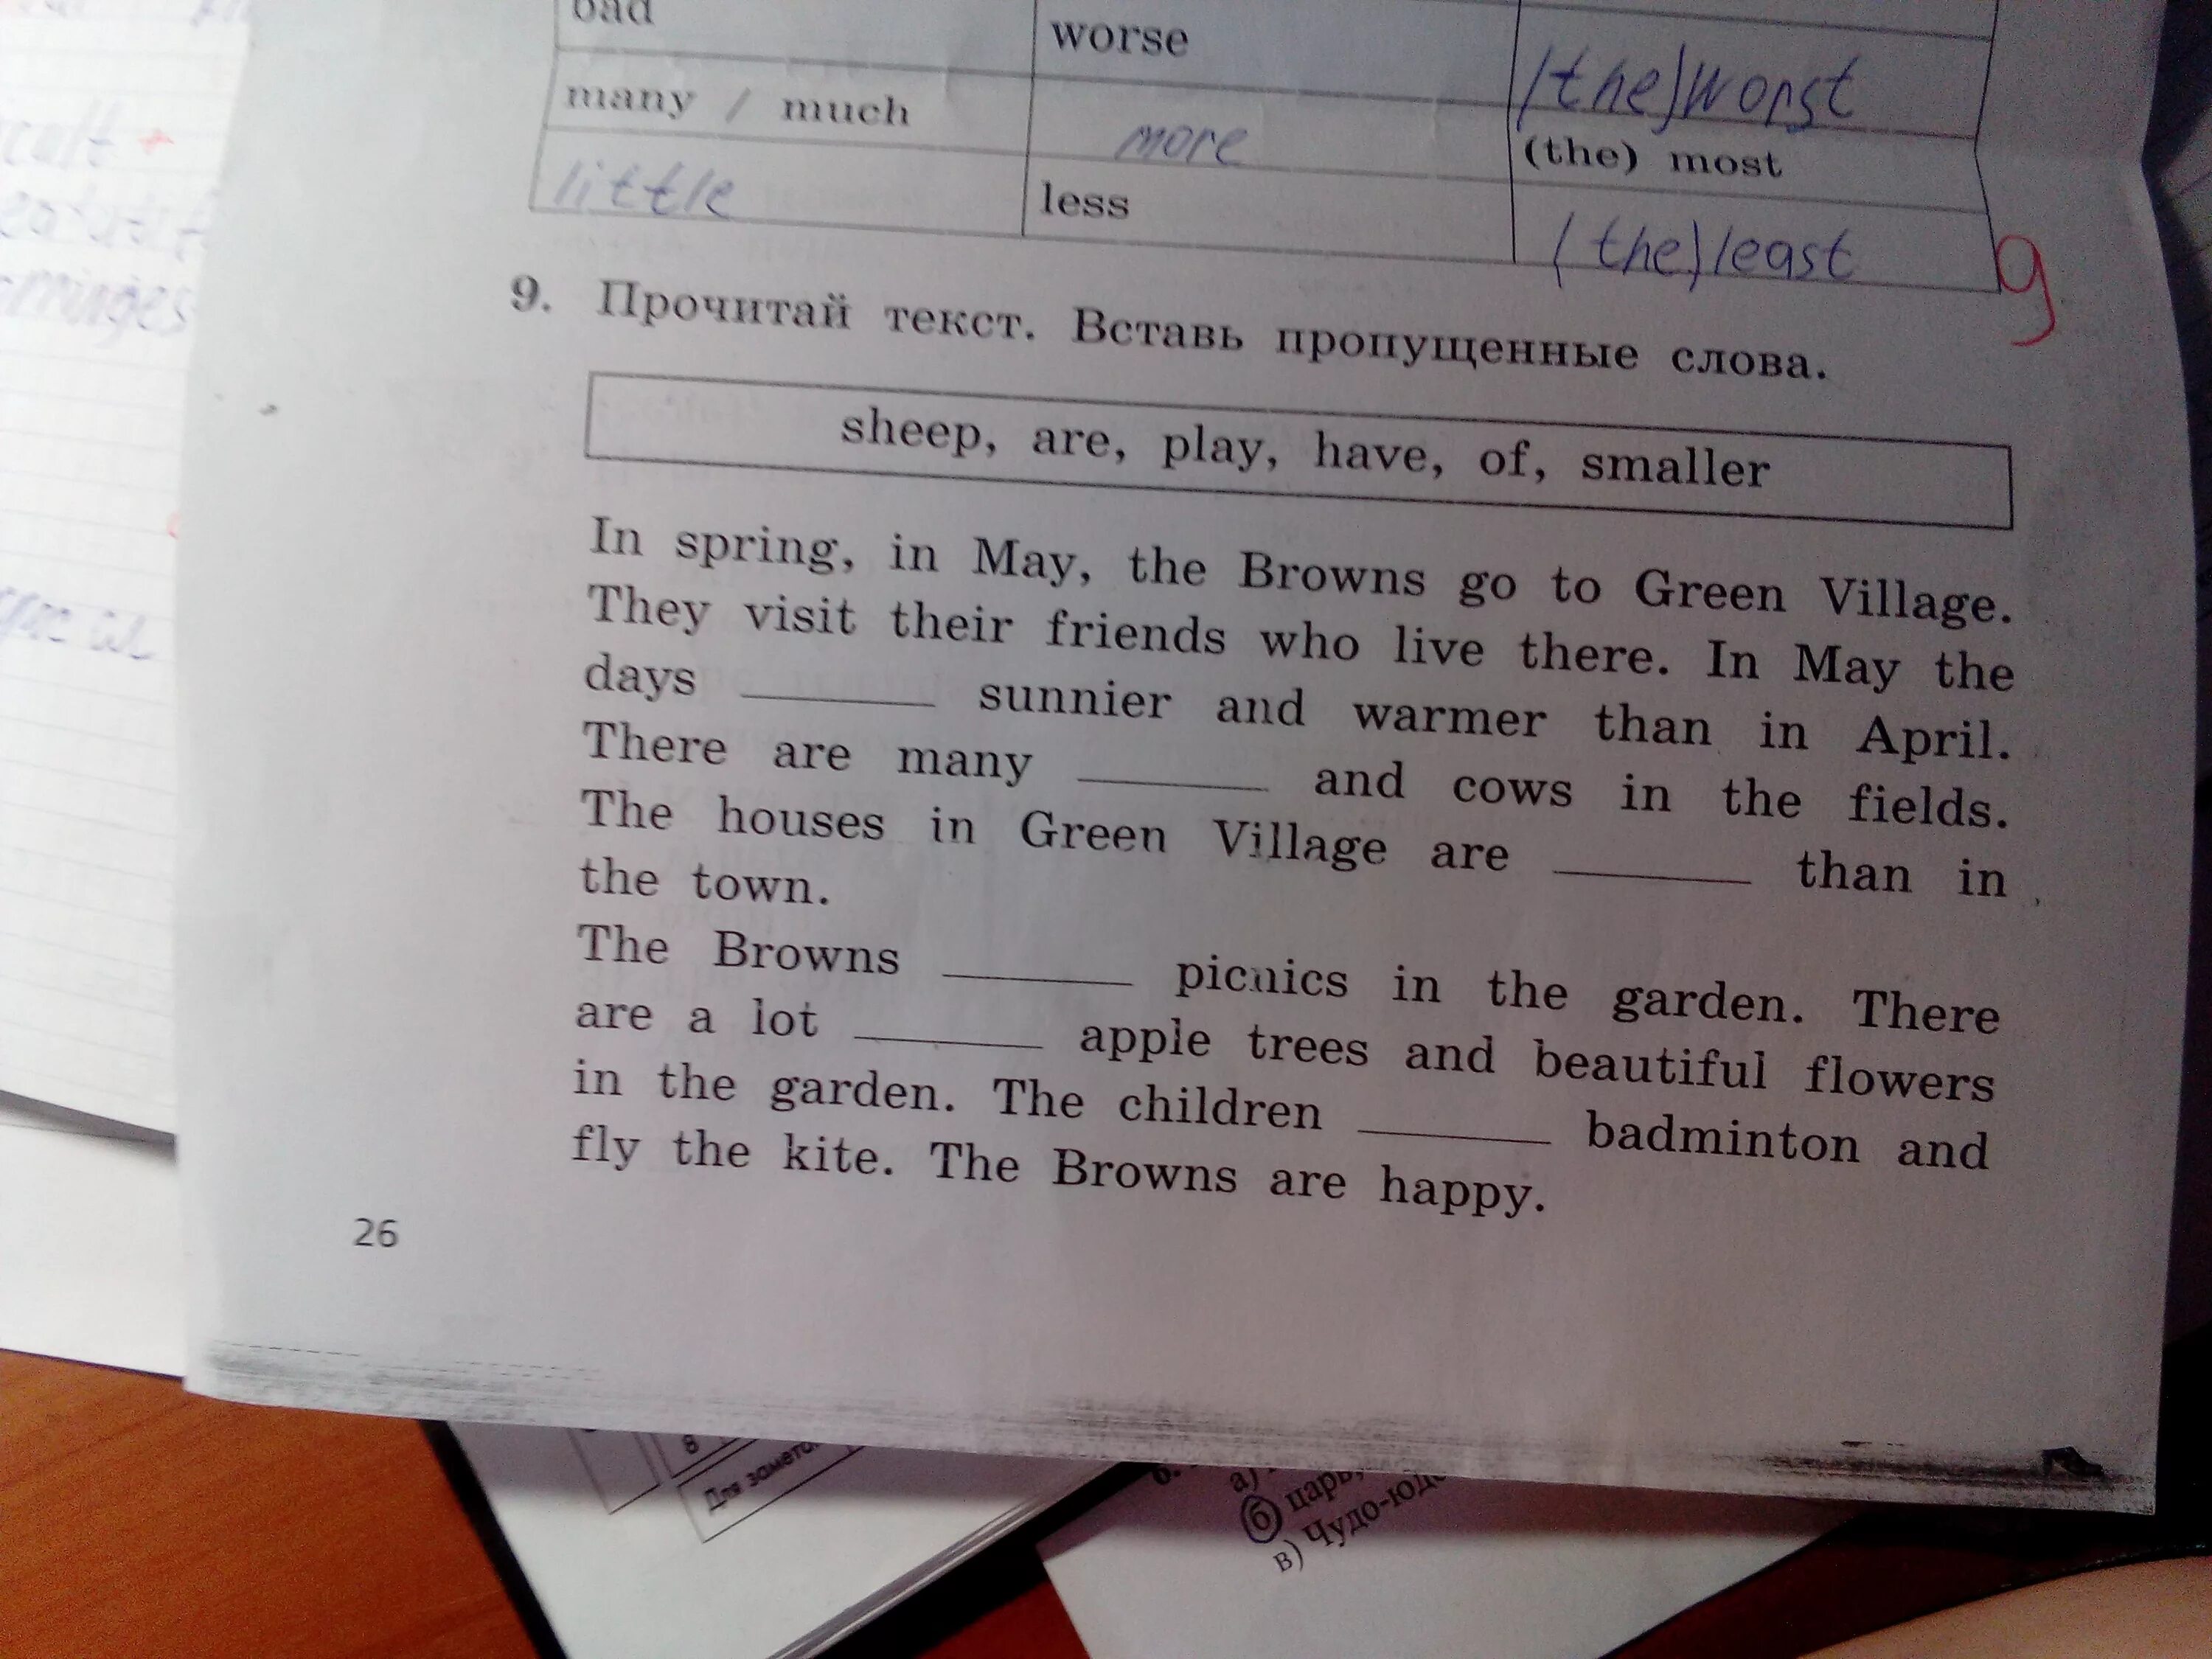 In Spring in May the Browns go to Green Village вставить пропущенные слова. Прочитай текст вставь пропущенные слова. Вставьте пропущенные слова was were. Вставьте пропущенные слова is and are and was and were.